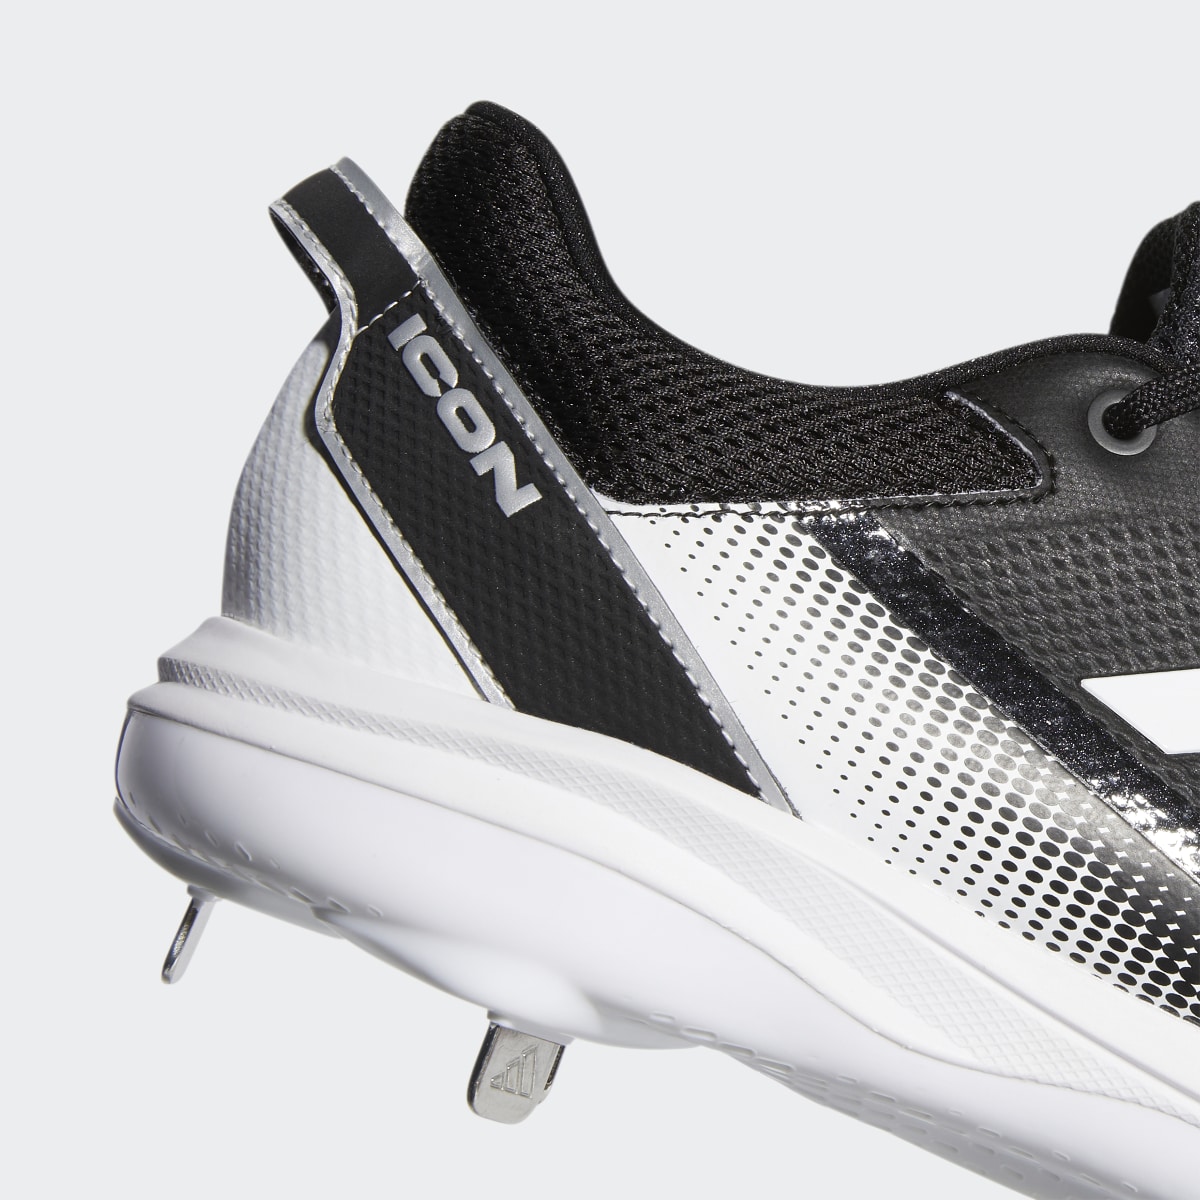 Adidas Icon 7 Cleats. 8